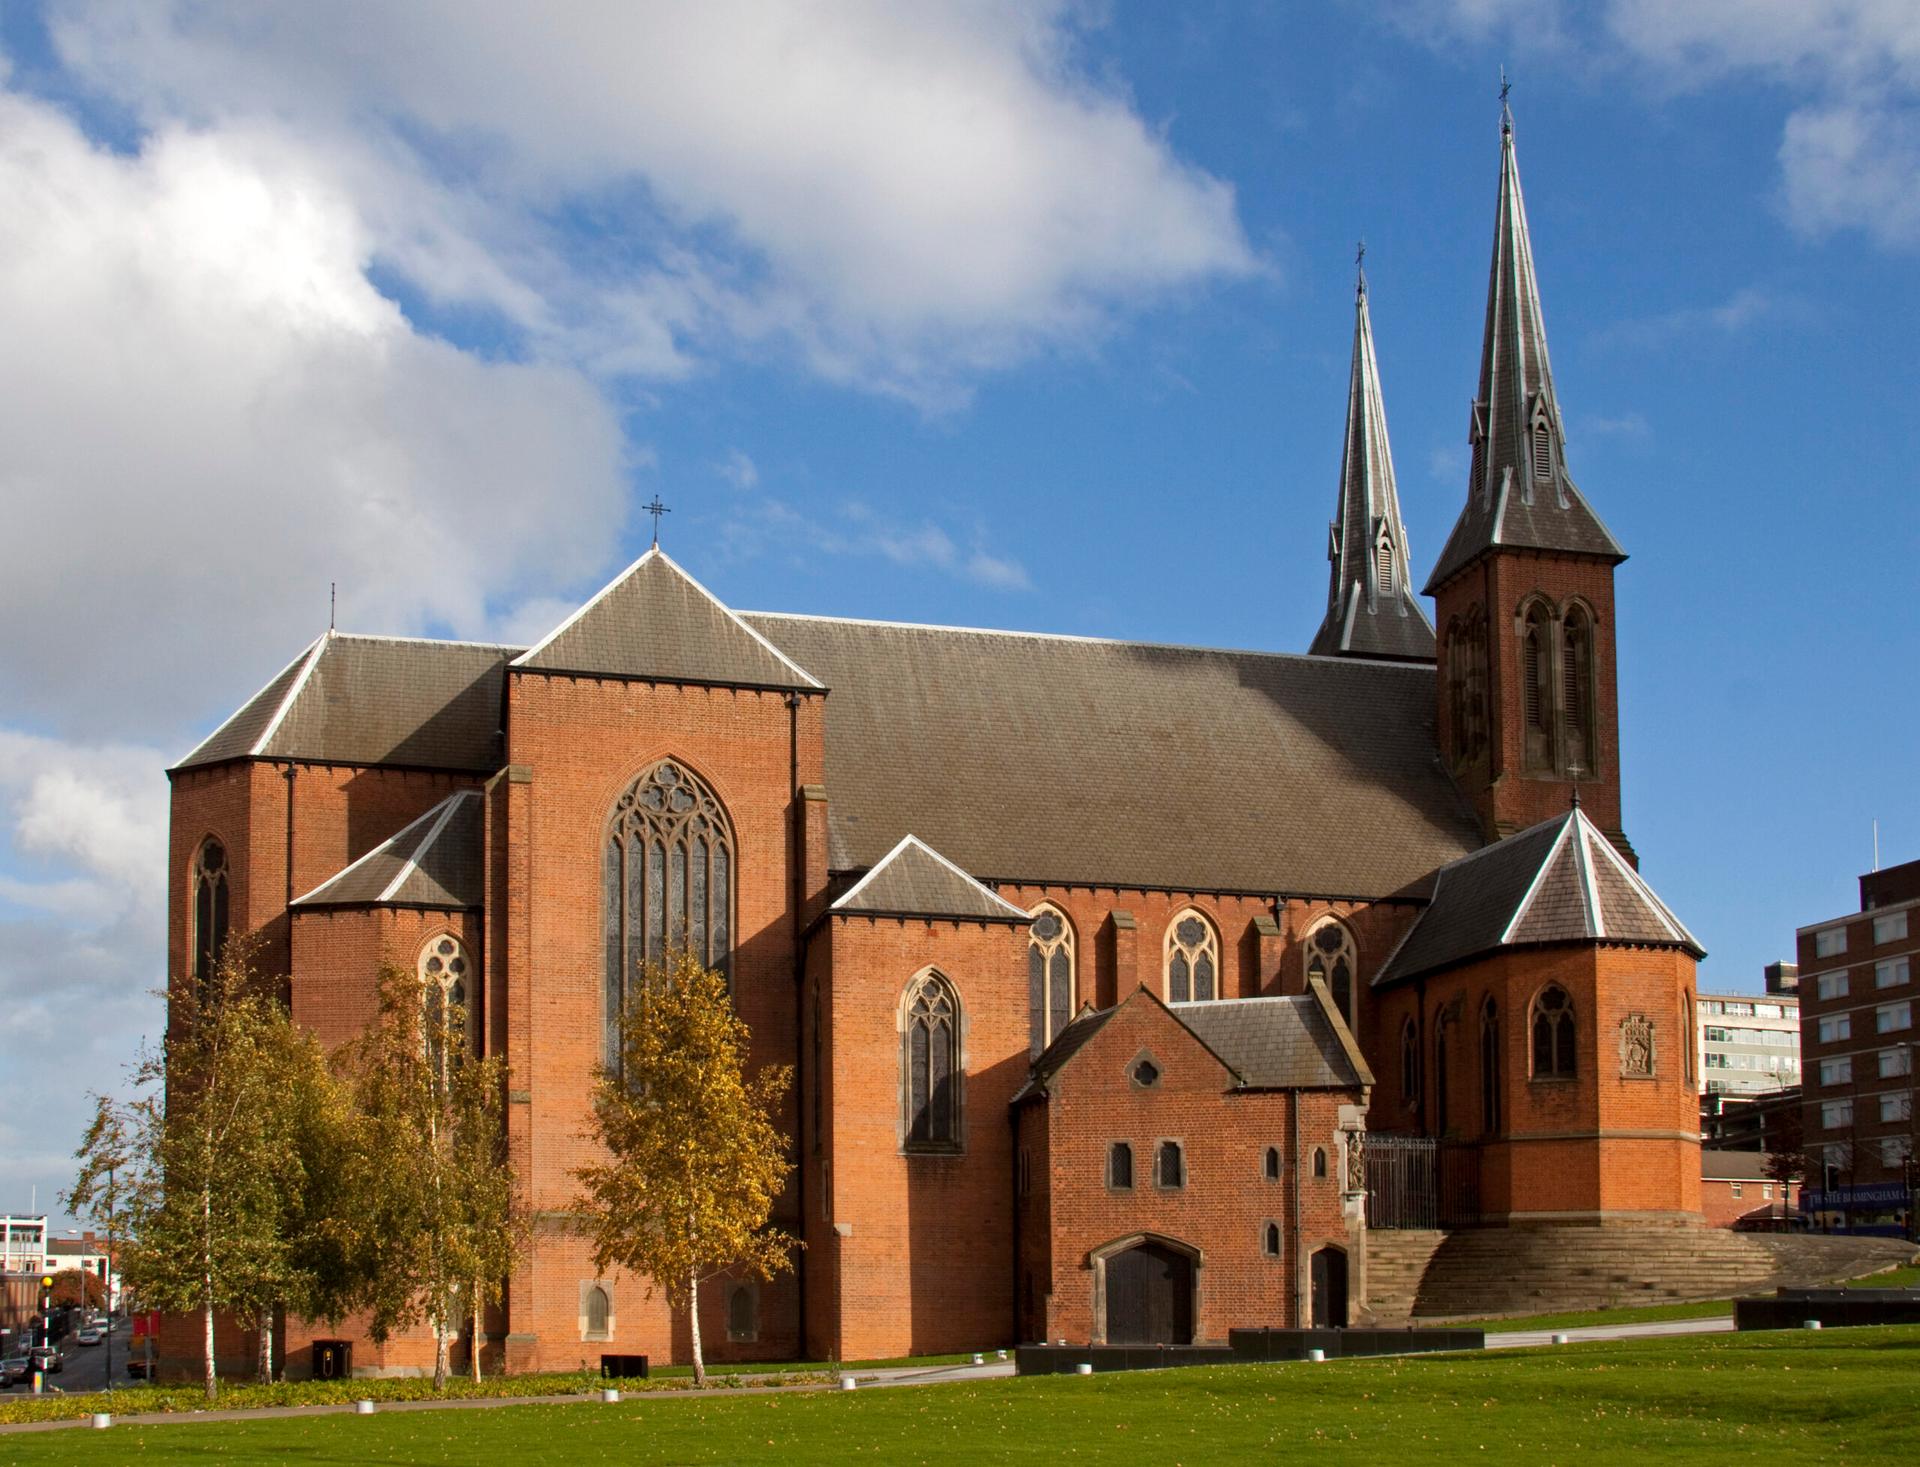 British expert adds 50 more churches to see before you die